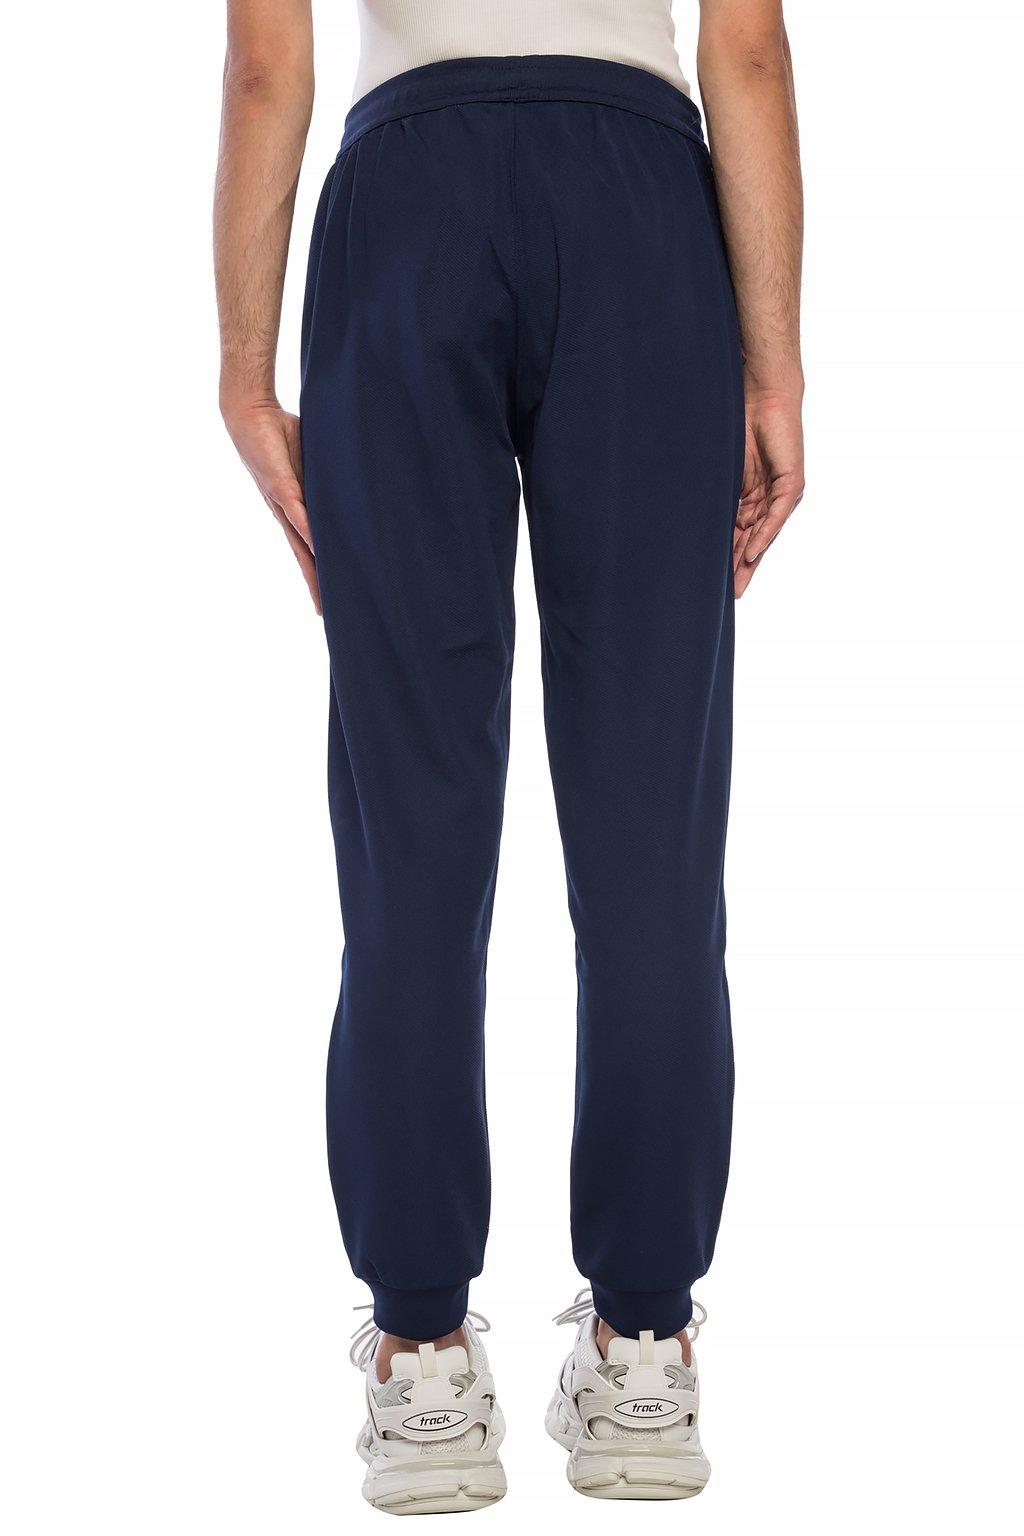 adidas Originals Synthetic Branded Sweatpants in Navy Blue (Blue) for ...